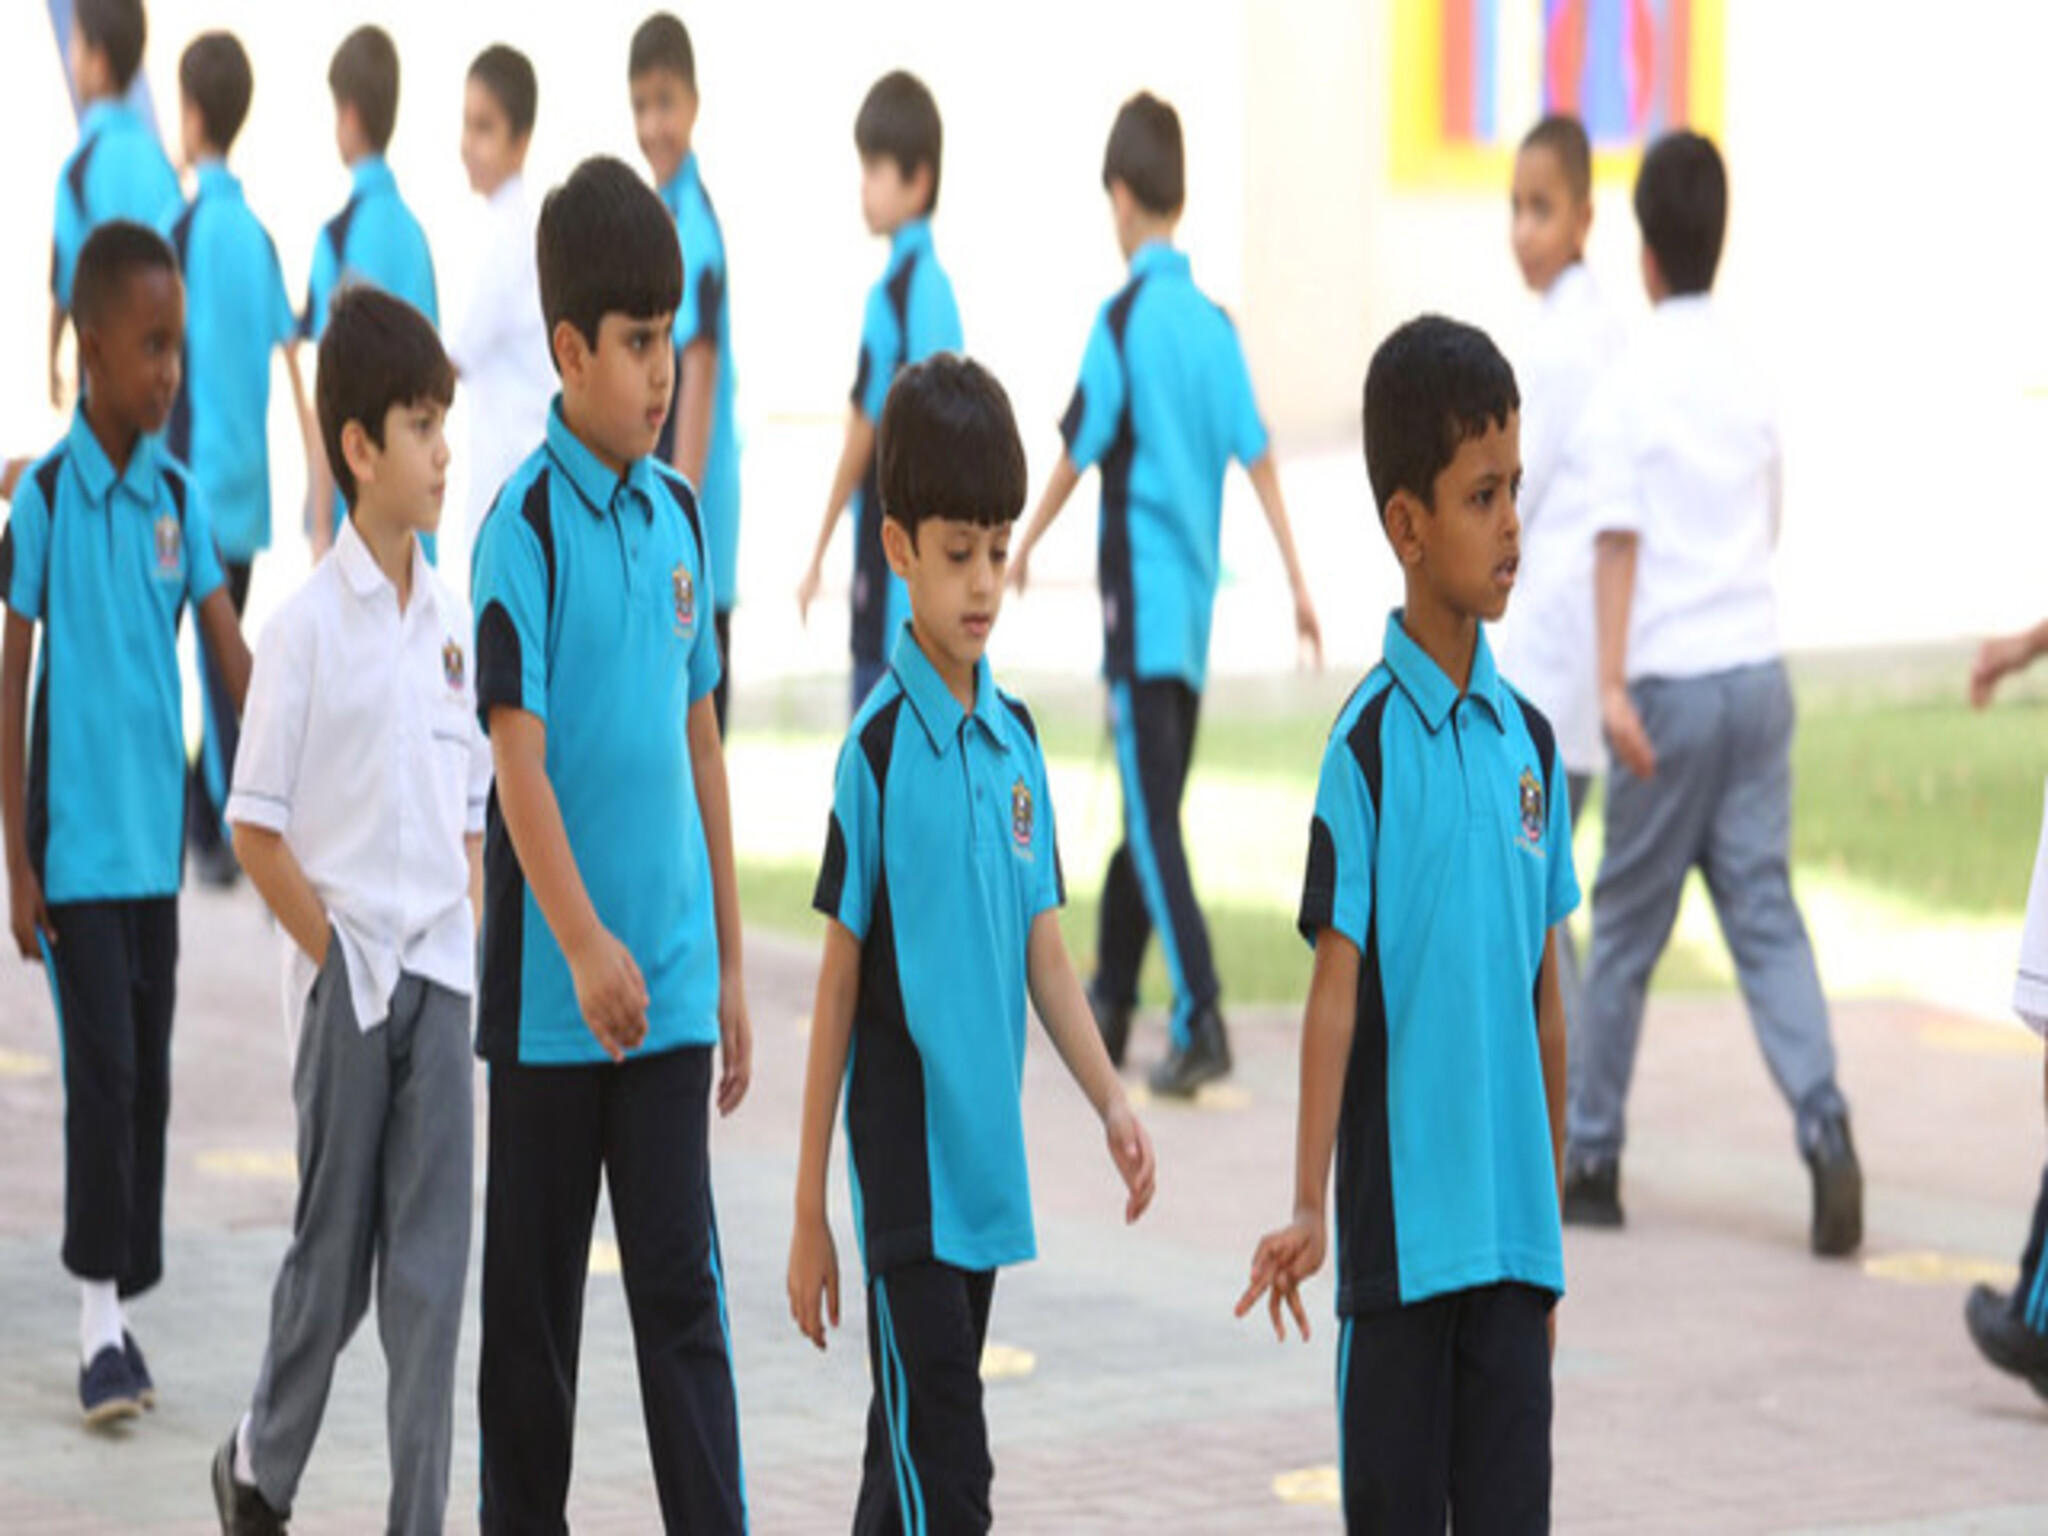 The emirates announces the start of distributing school uniforms for the next academic year